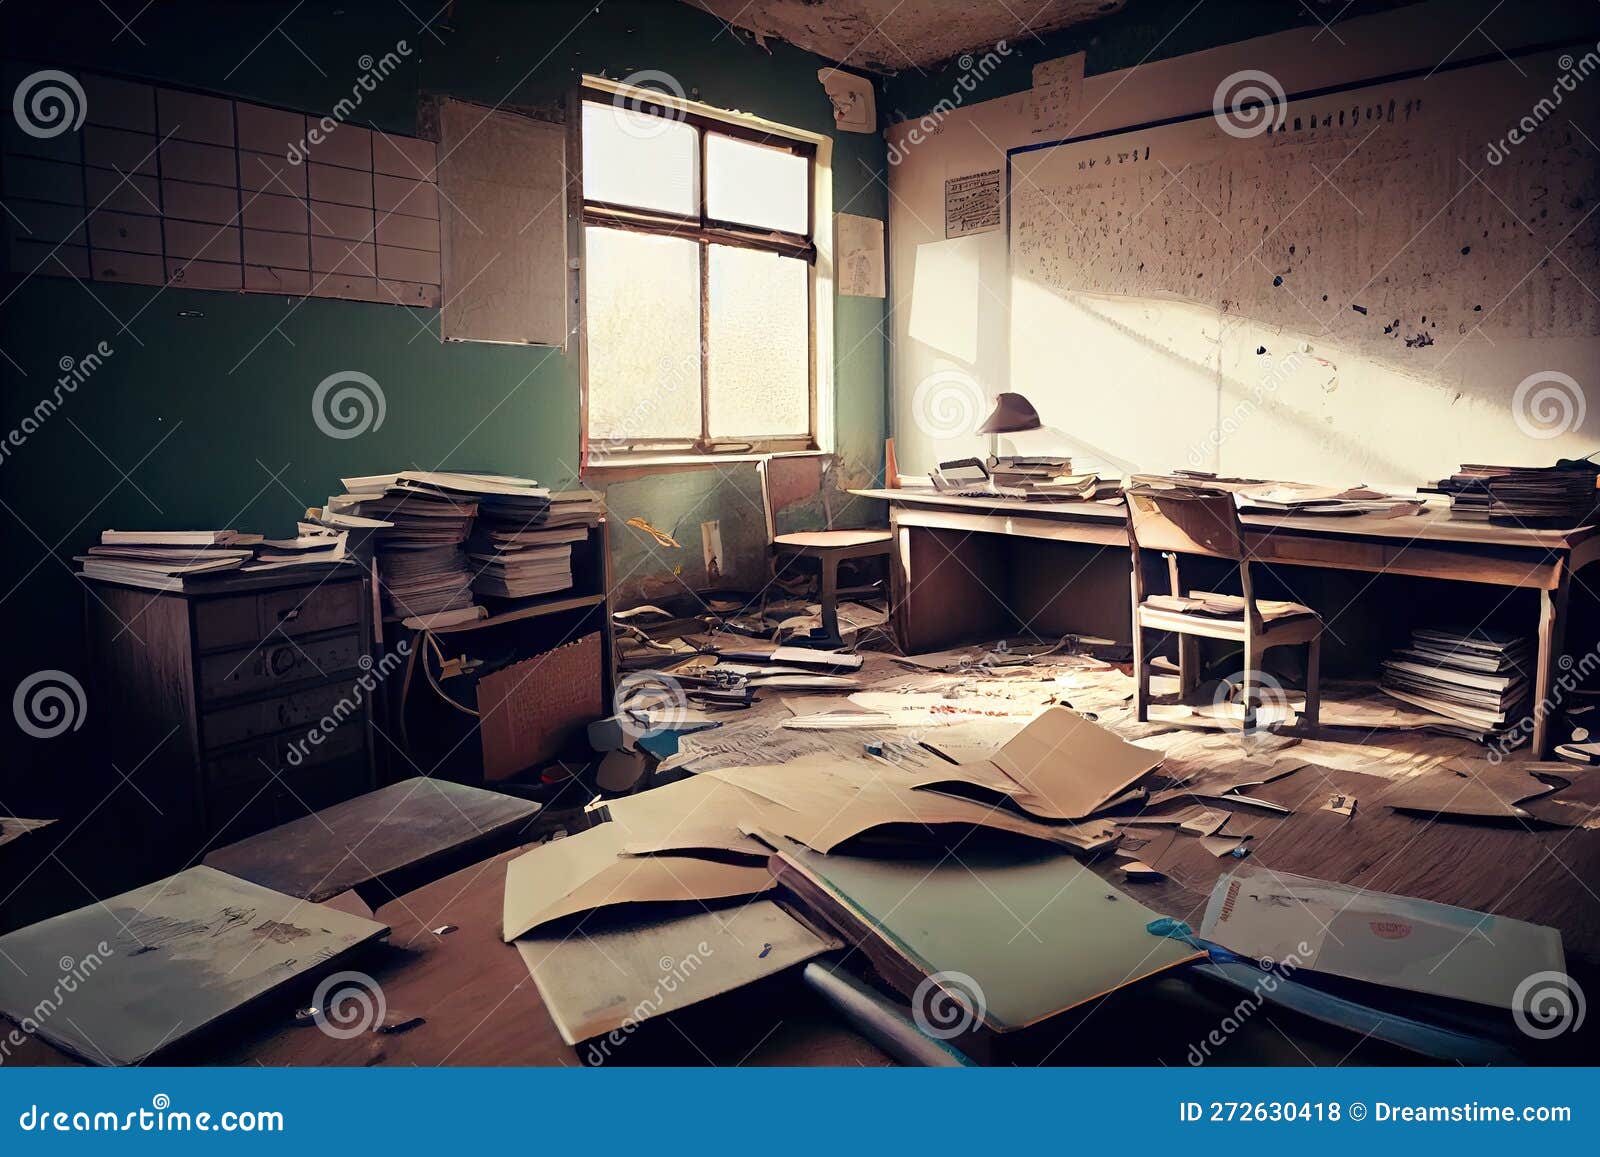 Empty School Classroom with Books, Papers, and Pens Scattered on Desks ...